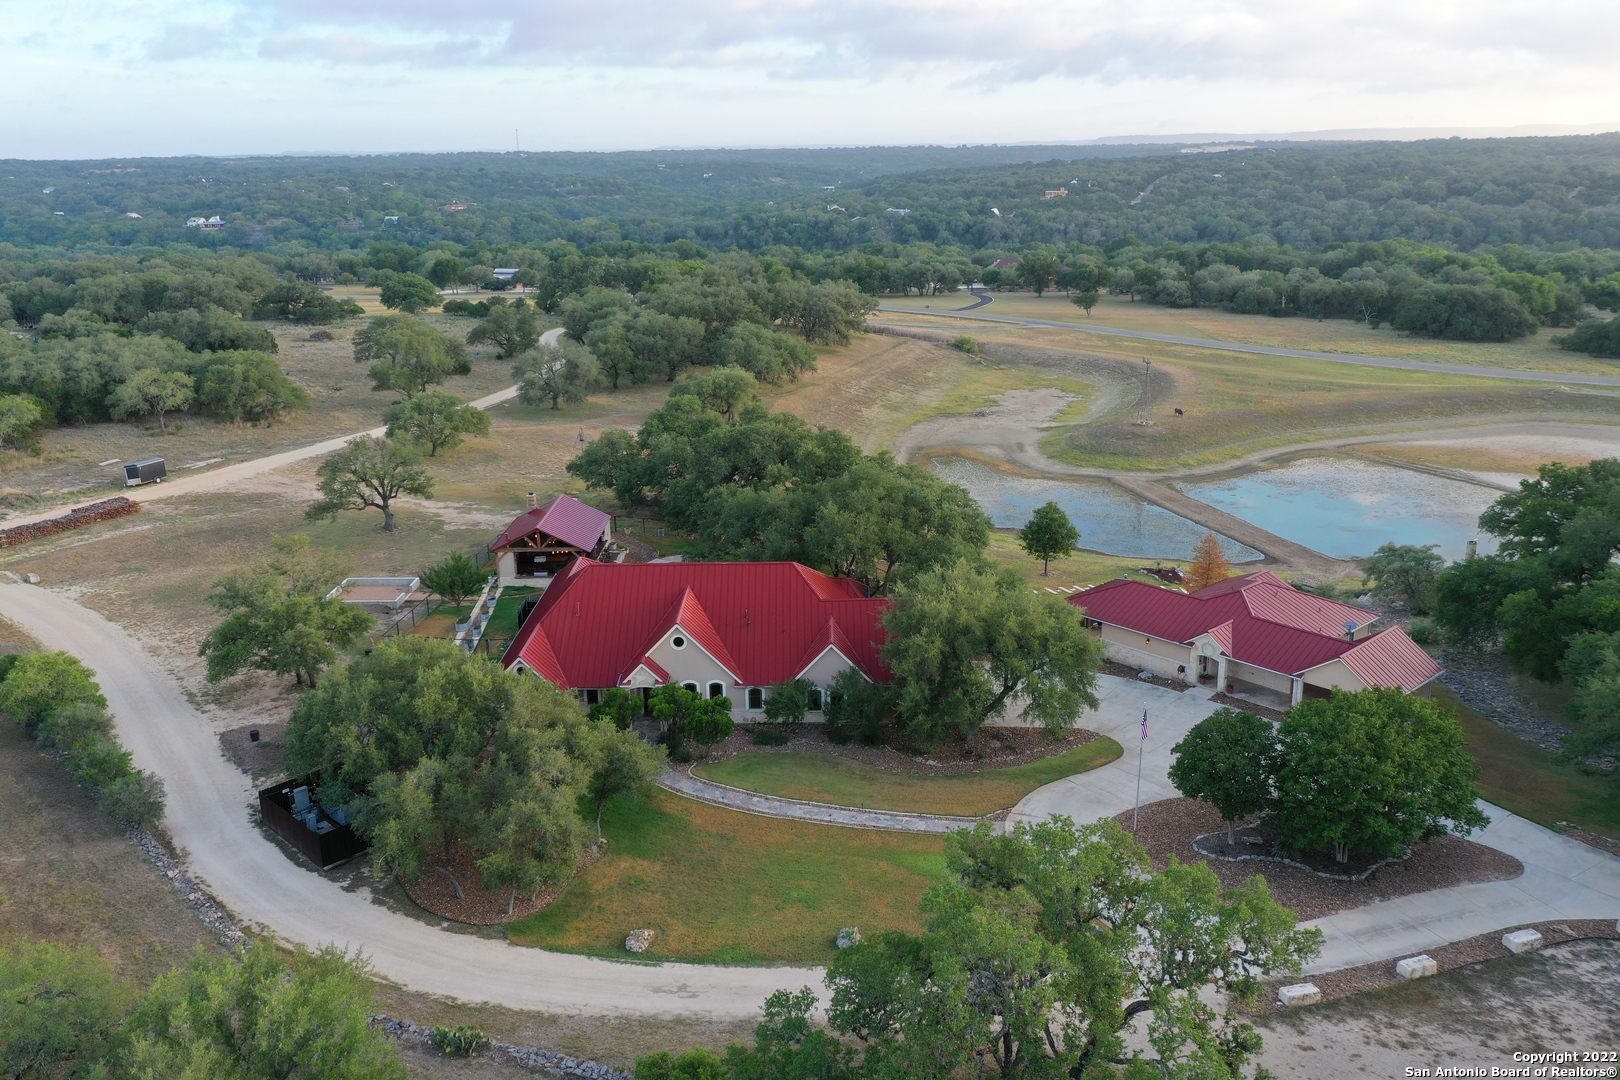 **Make sure to watch the video at https://youtu.be/KH5qi9NVqNE***  Look no further for your Texas Hill Country estate in the highly sought after gated neighborhood of Waterstone. This privately gated home is perfectly positioned between Boerne and San Antonio, just minutes from downtown Boerne.    This property is Hill country living at its finest. You will enjoy 25 oak studded acres of land, a private pond, a beautiful main house, large guest house, amazing outdoor entertainment area with a pool and spa, and an oversized  40x60 workshop with the upstairs finished out with two offices.  The main home is 3,320 square feet. The open concept floor plan has four bedrooms, three and a half  baths, a formal dining room with a wet bar, breakfast nook, large living room, and office area. The master bedroom has a sitting area and an exterior door leading to the outdoor entertaining area. His and her master bathrooms, including separate closets, vanities, and toilets, connected by a walk in shower. The second bedroom has a private bathroom, bedrooms three and four are connected by a Jack and Jill bathroom.    The newly complete guest house is 1,500 square feet. This home is fully handicap accessible with wide hallways and doorways as well as a shower and toilet area that were built for easy wheelchair access.  Two bedrooms and 2 full baths with a full kitchen, laundry room, and covered patios overlooking the property. The second bathroom is also equipped with a walk in tub. A covered two car carport is also attached to the home.  The new outdoor entertainment area is an entertainer's dream! Relax and entertain year round with this backyard oasis. The sprawling back patio includes a heated pool and spa that overlooks the property and your private pond. Pool cabana and outdoor kitchen are 1,000 square feet of pure bliss canopied by beautiful oak trees. The perfect place to take refuge in the hot Texas summer. Features of the cabana are mortise and tenon trusses, beautiful light fixtures, windmill fans, large wood burning fireplace, and  plenty of seating with a double sided bar for entertaining.  The 1/2 bath includes a sauna (could be converted into a shower) and space for an extra refrigerator.  The kitchen area boasts a copper farmhouse sink, refrigerator, gas grill, 3 gas burners, wood burning brick pizza oven, gas griddle, and ice maker.  The second outdoor entertaining area includes more seating, sink, and refrigerator.  The custom fire pit built in Breckenridge Colorado by Breck Iron Works completes the area.  The oversized workshop is complete with two built out office spaces, a storage area, and a walk in cooler! Get ready for hunting season as you can bow hunt on your own property and hang it to chill in your own walk in cooler.   Additional outdoor features include a whole house emergency generator (for main house and guest house), two 500 gallon propane tanks (buried), an additional outdoor storage building for lawn mowers, etc, and concrete footings for a greenhouse 20 x 20 - electric and water are available.  This property is a sportsman's paradise. Axis deer, whitetail deer, turkey, ducks, and cranes call this property home. It's not unusual to see 25-50 head of axis deer drinking at the pond.   Take advantage of Waterstone's two private river parks. You can put your kayak or tube in one park and float down the river to the second park. Float the river without ever leaving the comfort of your community! Enjoy country living at its finest, yet still close to San Antonio (20 minutes), Boerne (20 minutes), and Spring Branch (20 minutes). Your new homestead awaits! This property has everything you need, plus the tranquility of living in the Texas Hill Country. Don't forget you will be in the highly acclaimed Boerne Independent School District, a huge reason why people move to Boerne! And, you will be living in one of the happiest small towns in America! (Take a look at the article https://www.onlyinyourstate.com/texas/happiest-